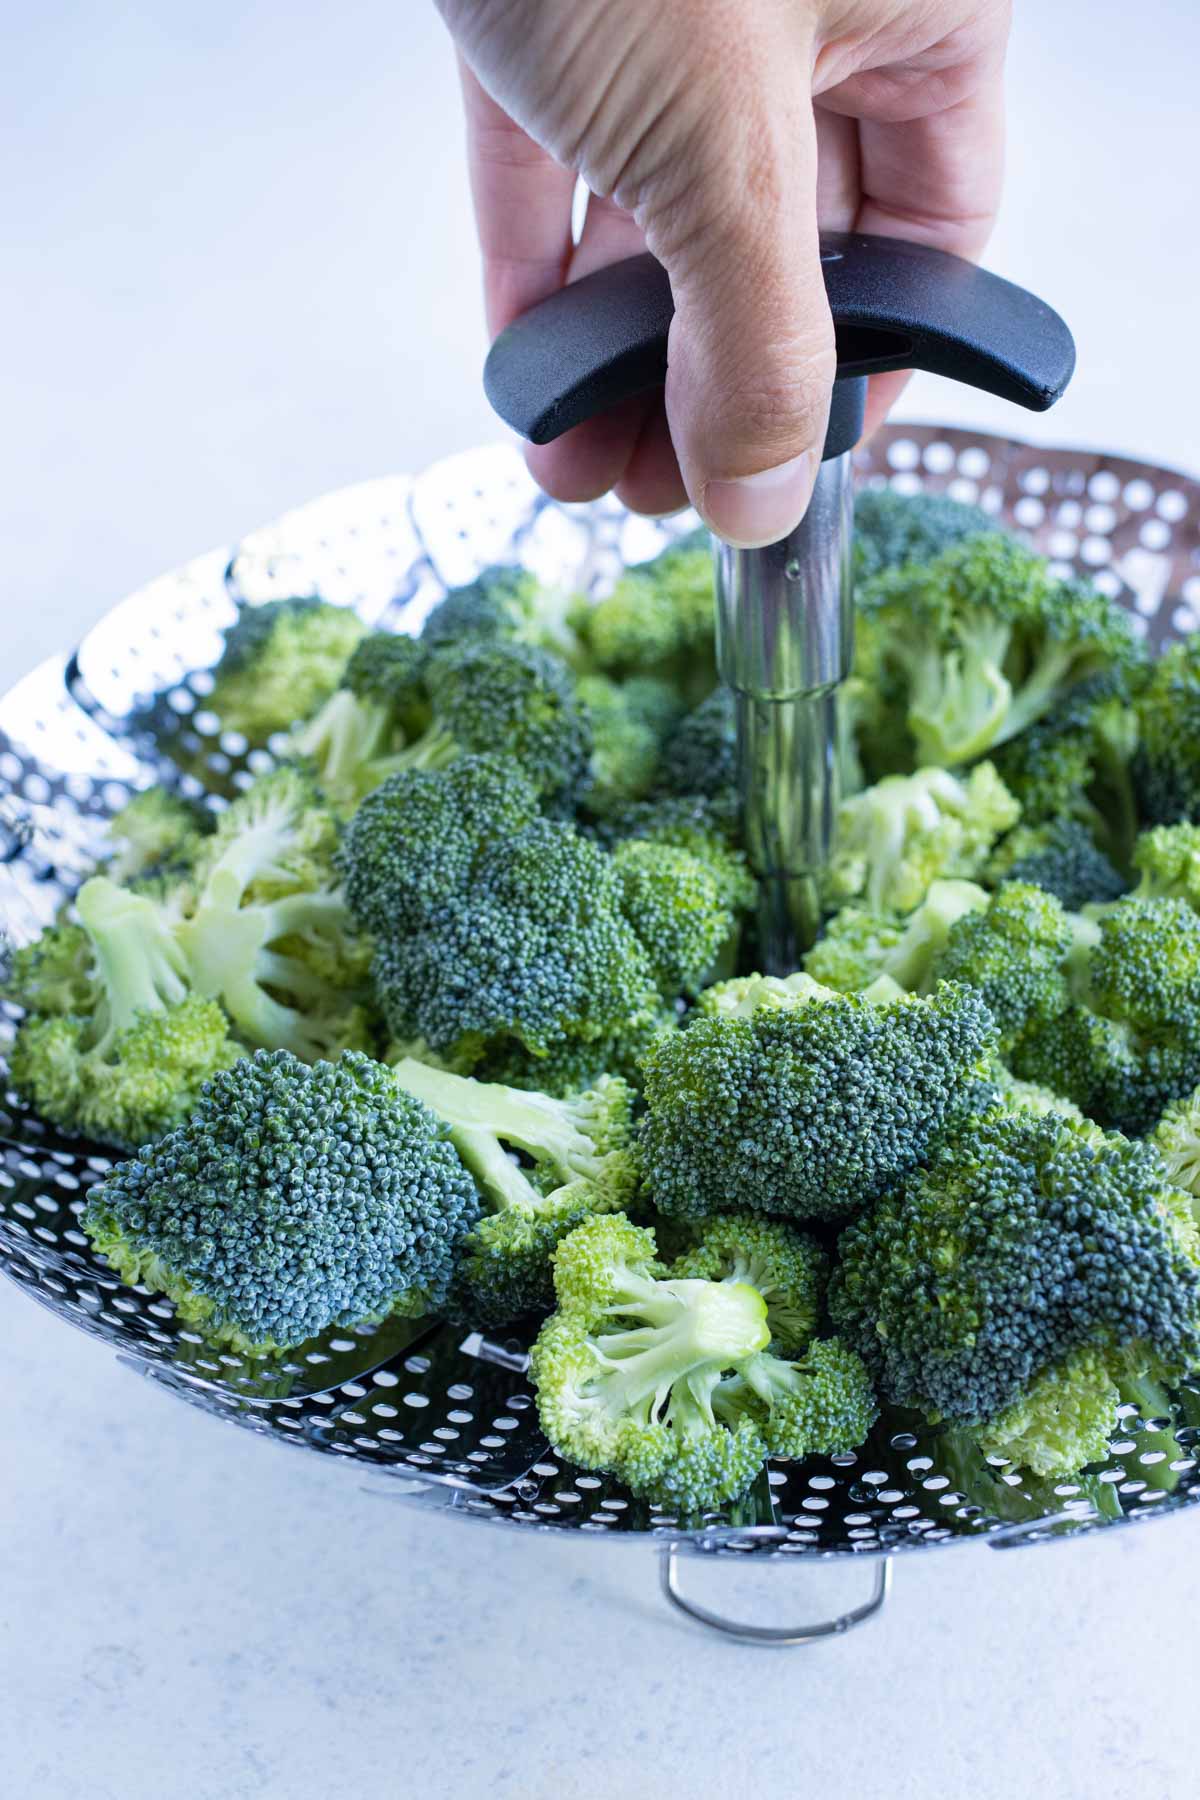 Broccoli is healthy when steamed.